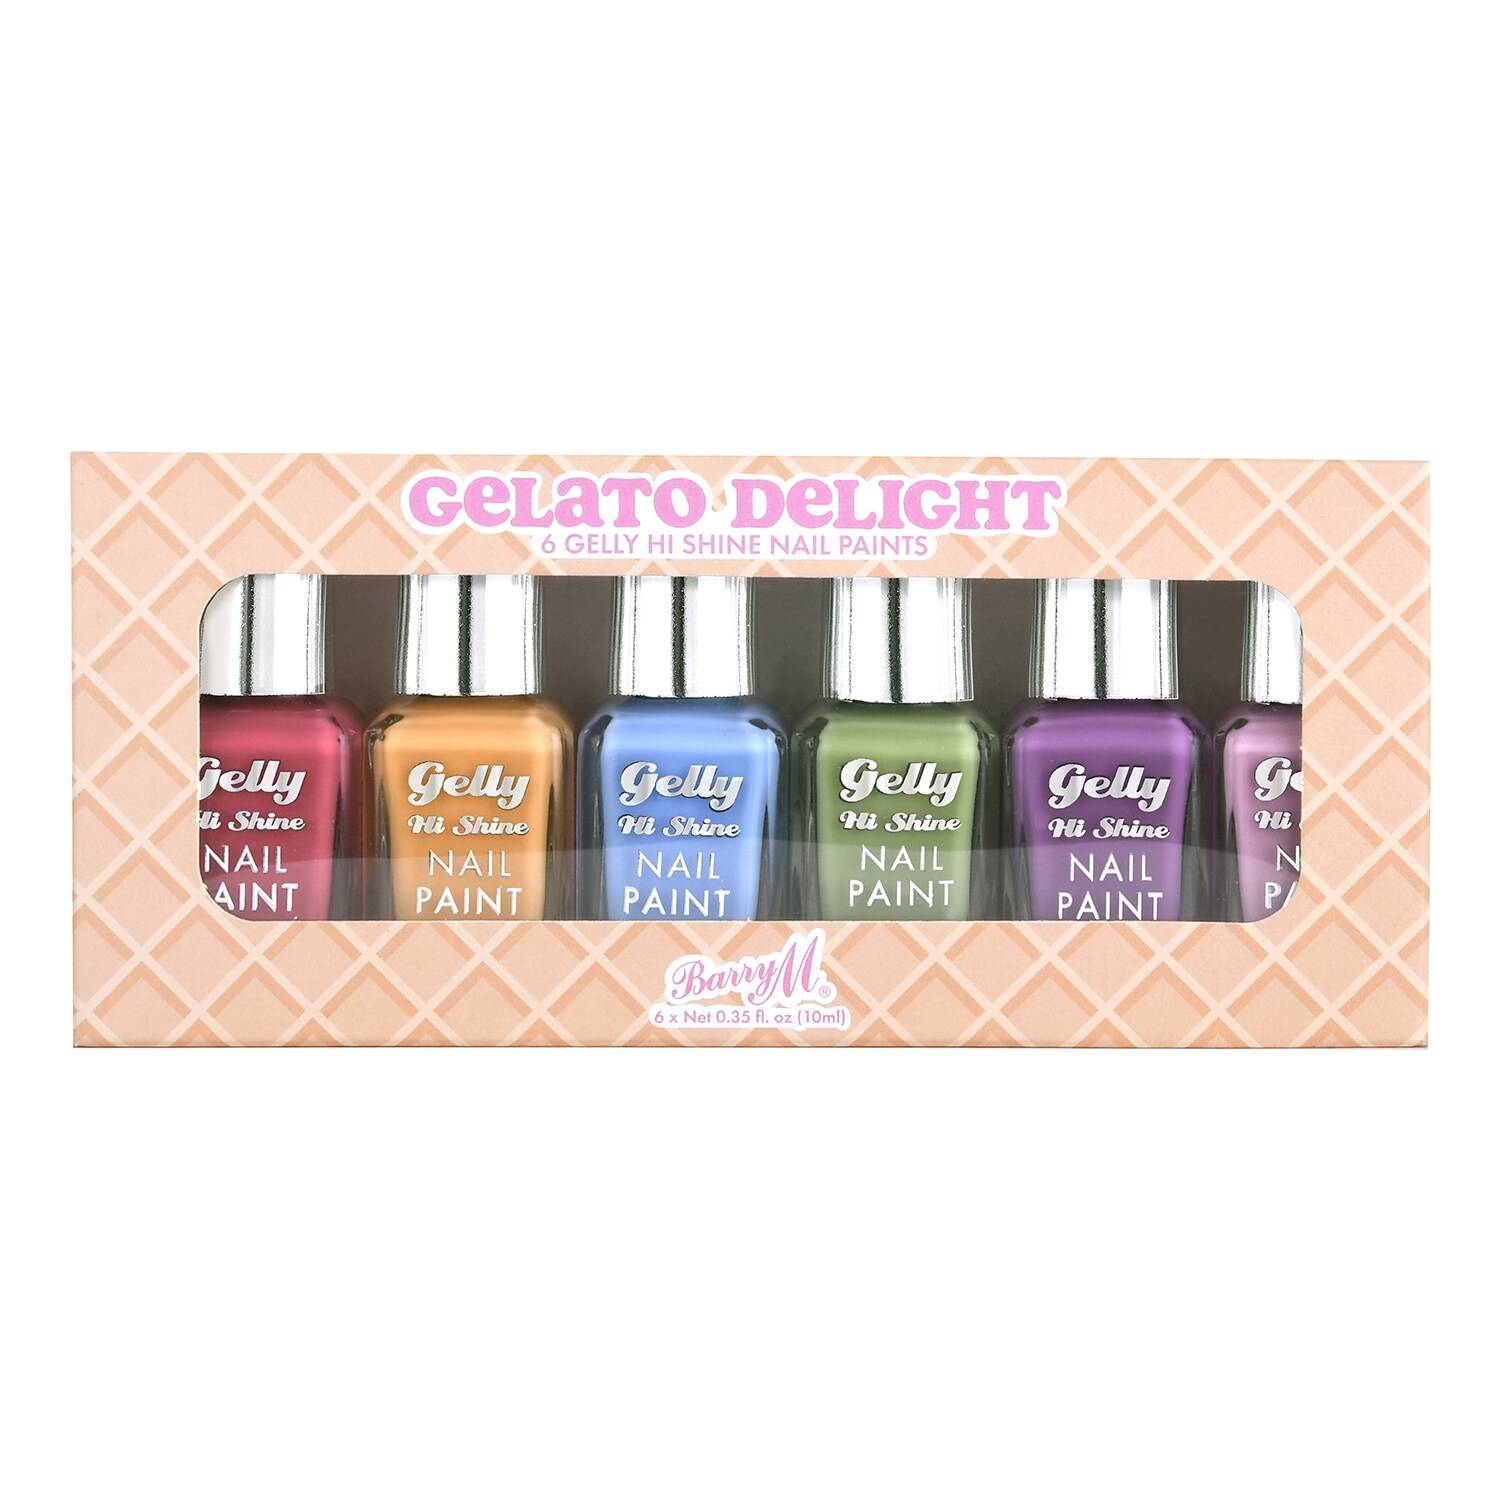 Barry M Gelato Delight Nail Paint Gift Set